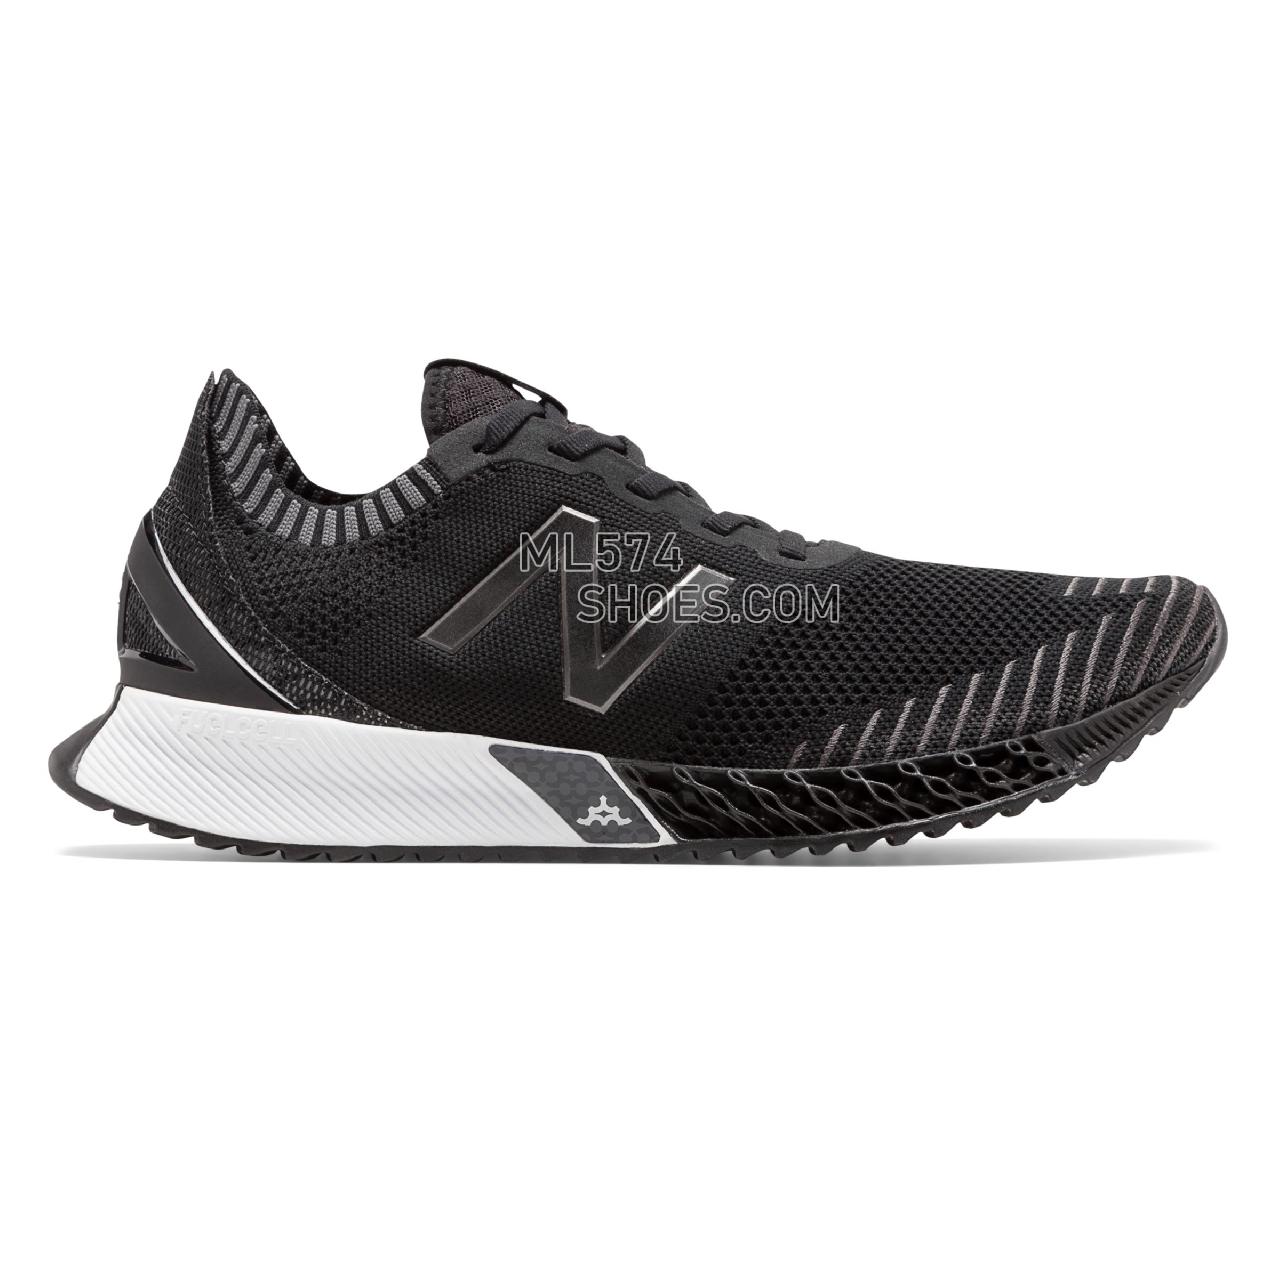 New Balance FuelCell Echo Triple - Men's Fuelcell TripleCell Echo MTRPBV1-26124-M - Black with Magnet and Gunmetal - MTRPBBR